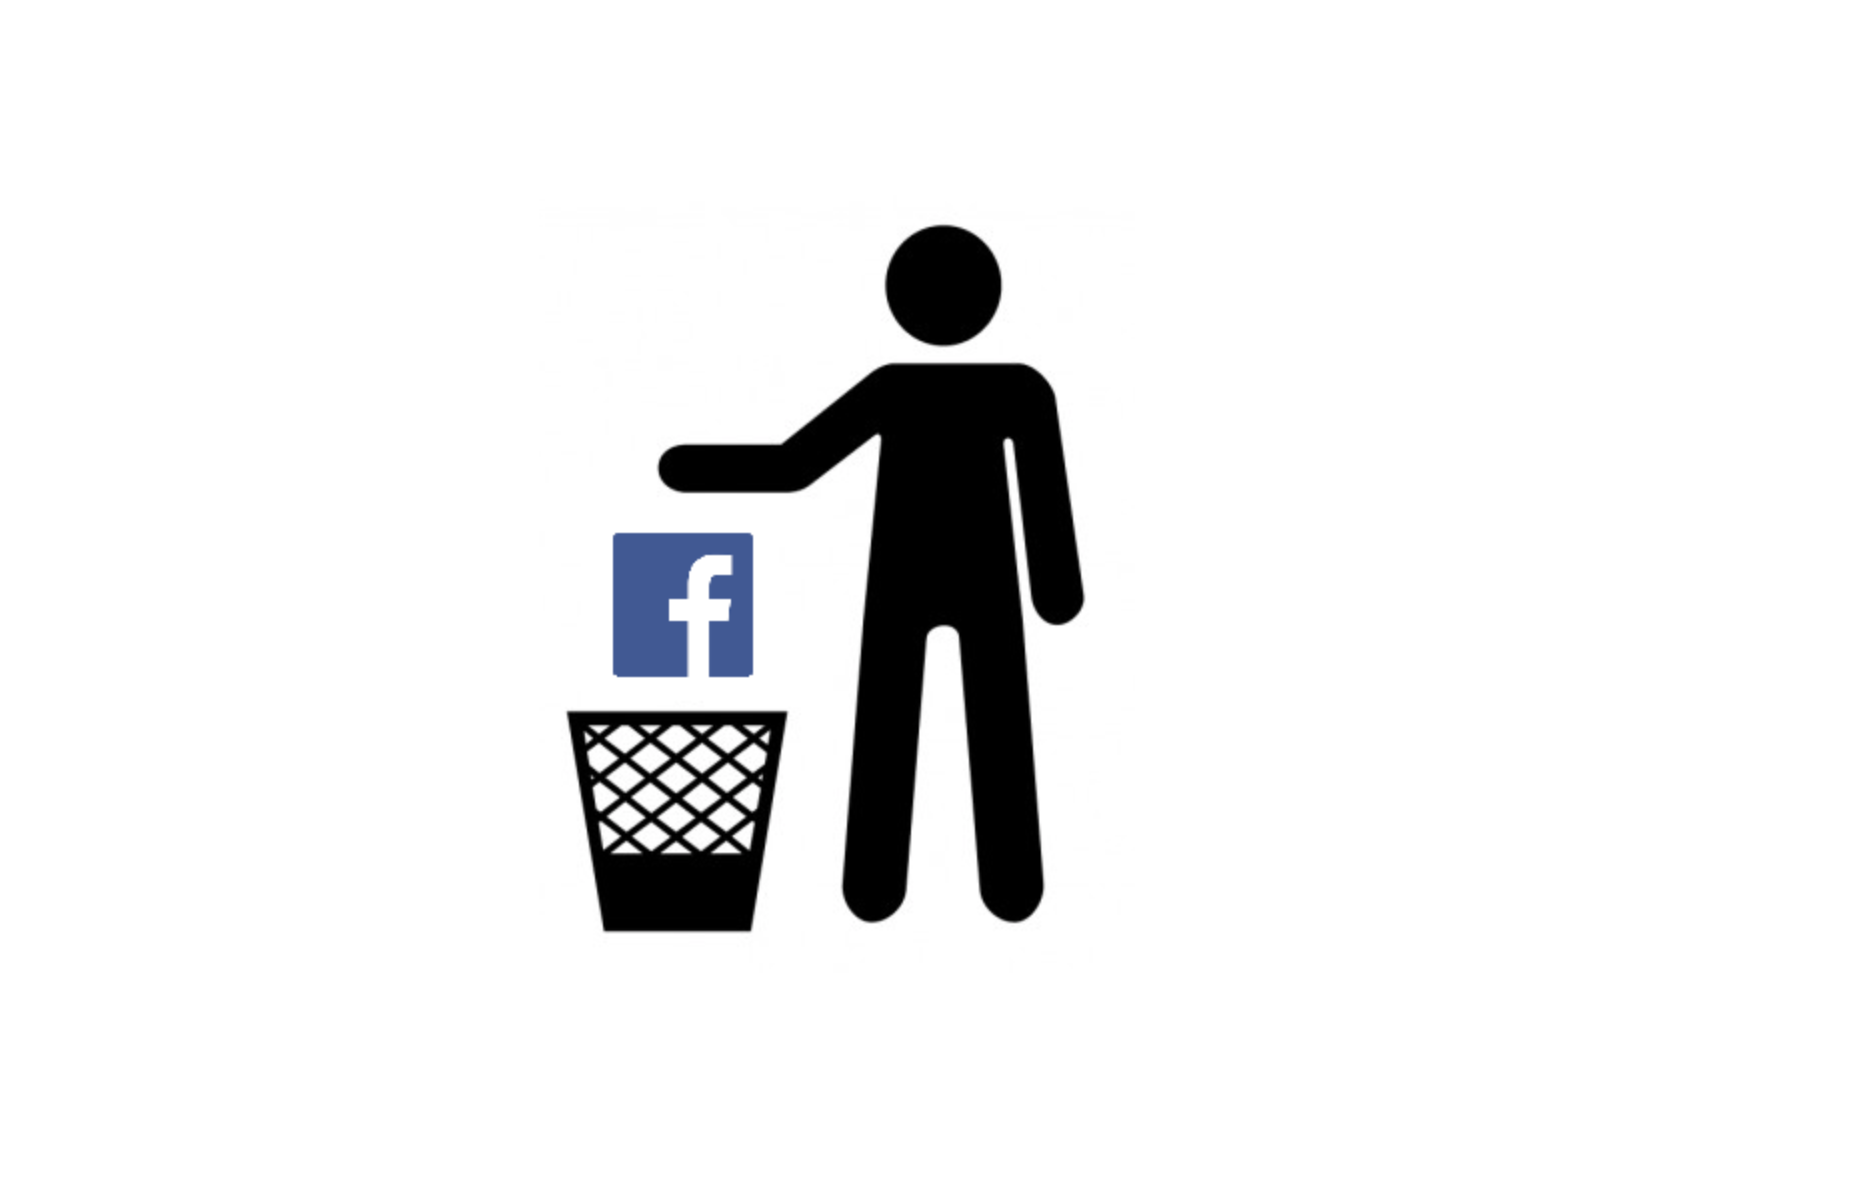 A stick figure person drops the facebook icon into a wastebasket.